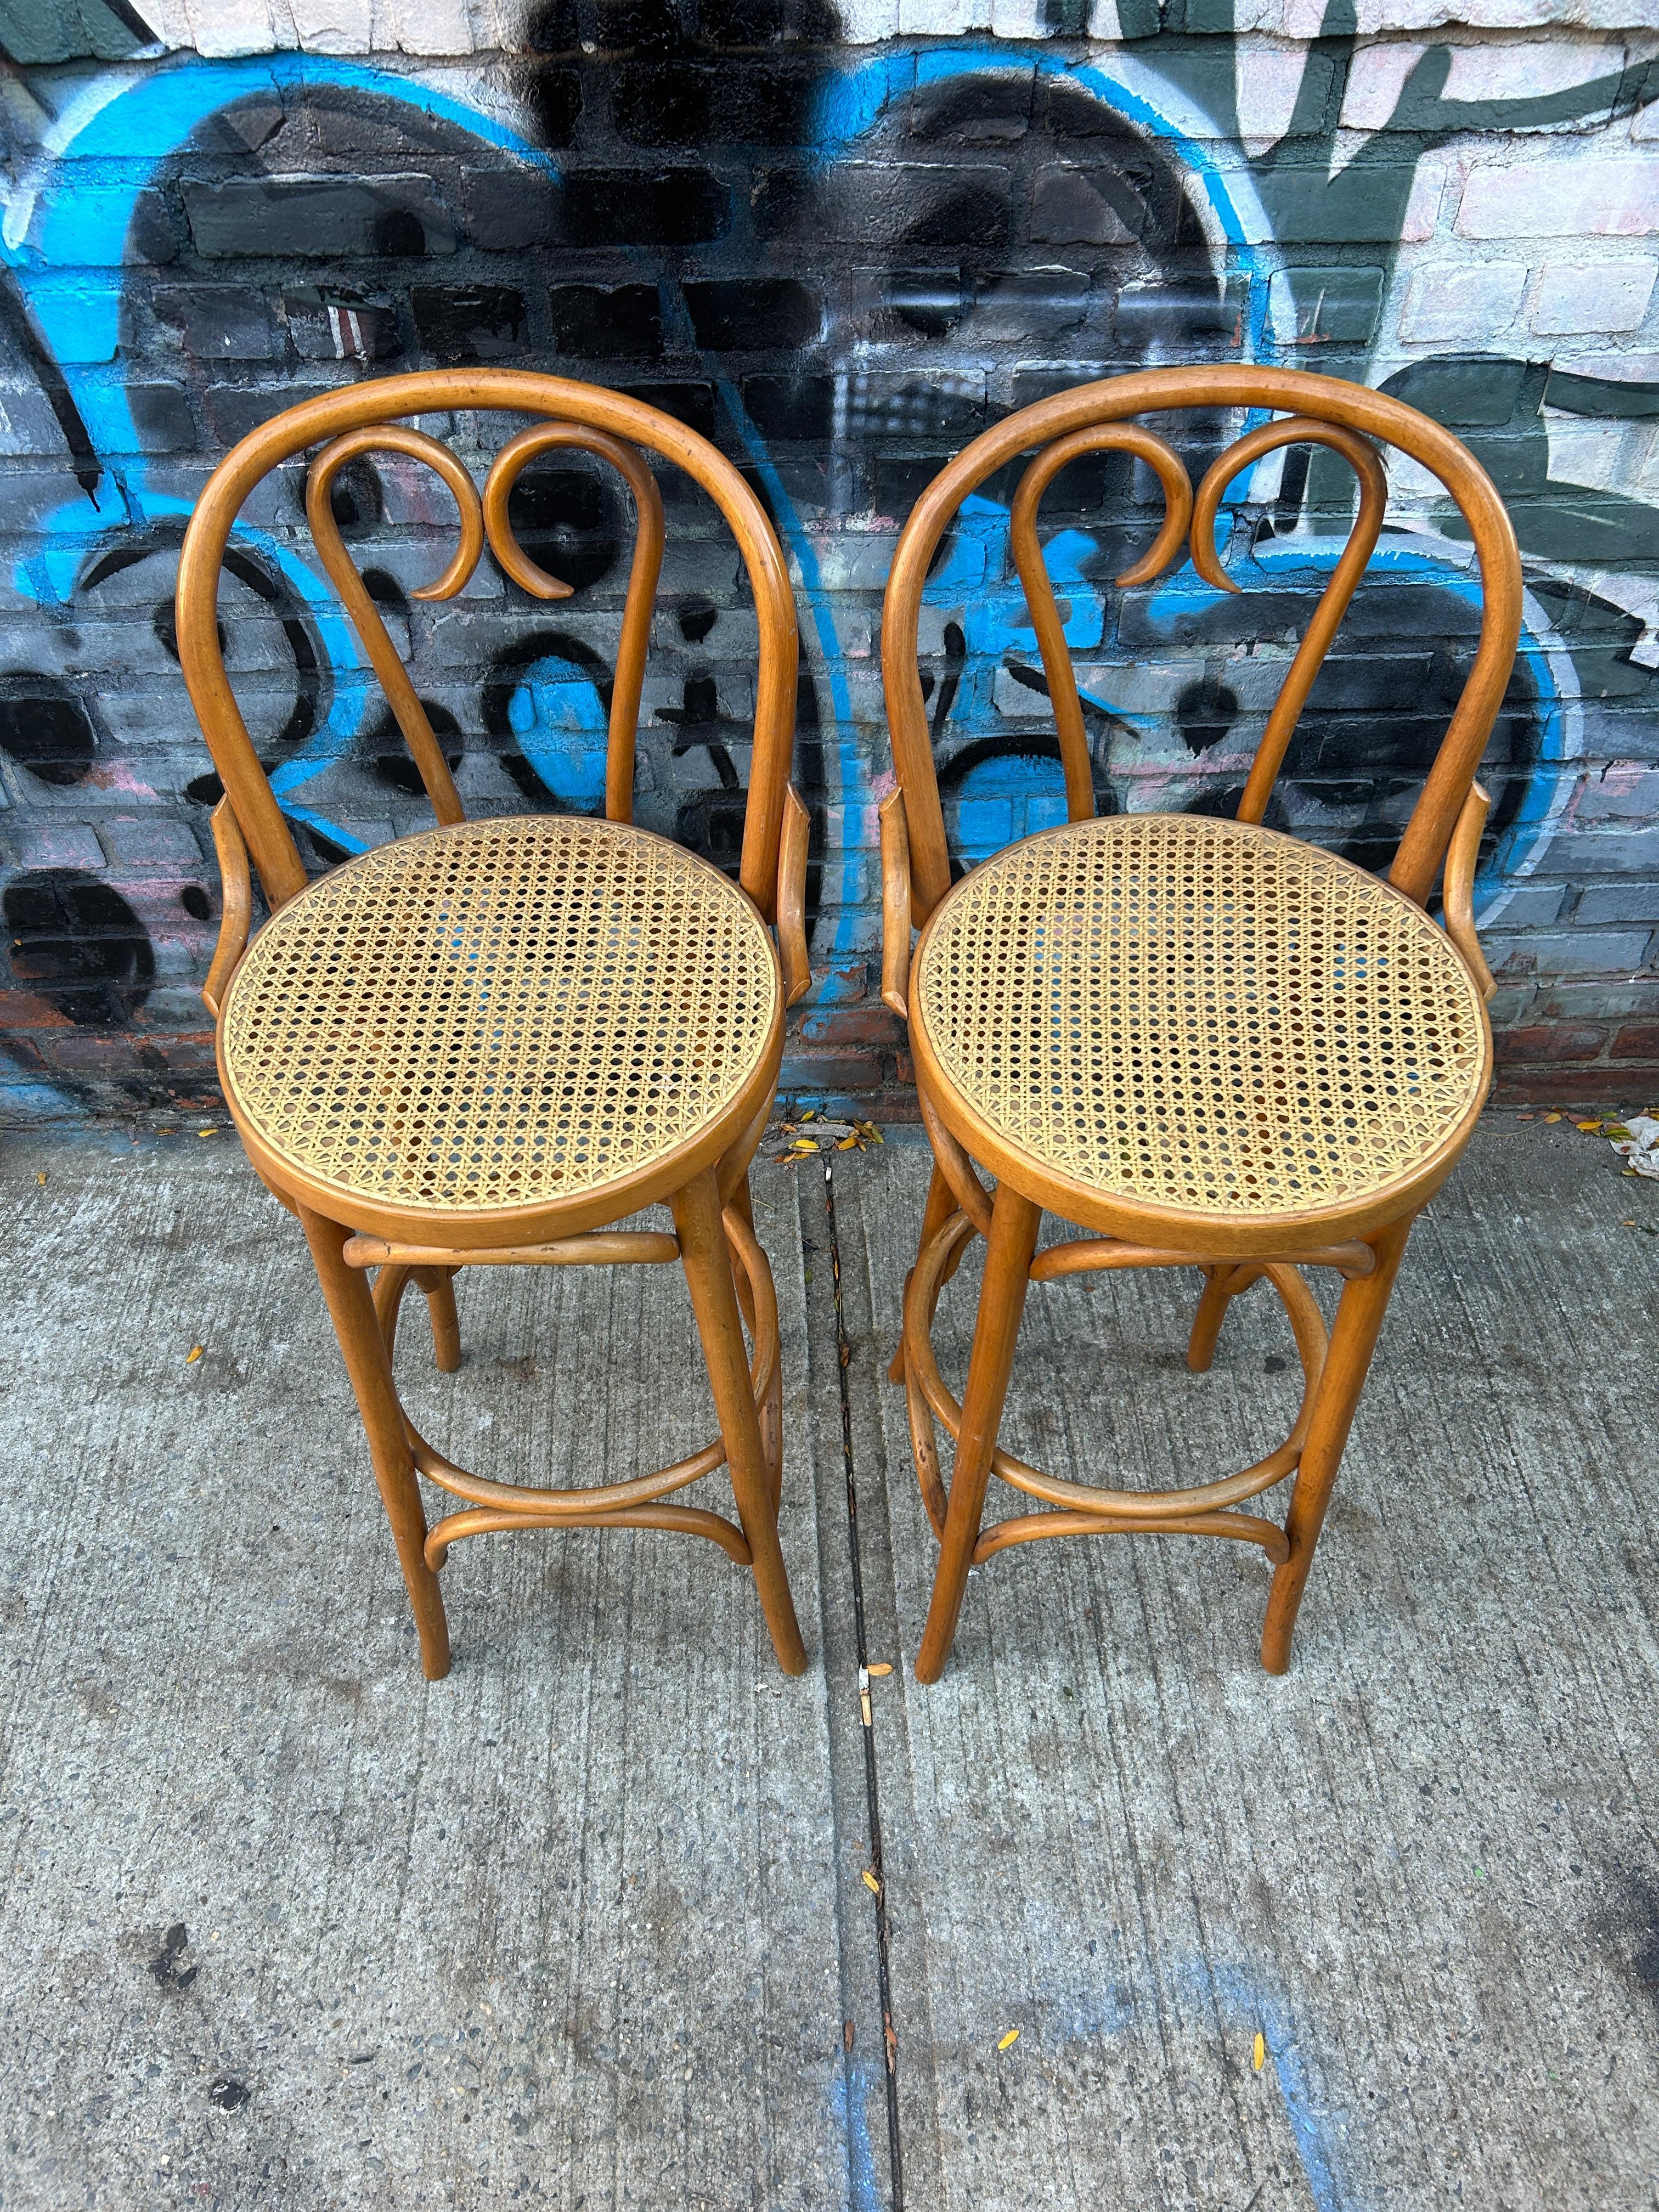 Mid century cane round bar height stools by Thonet blonde bentwood with light cane. Seat height is 30” high. Great vintage condition. Cane is perfect on both stools. Very sturdy and ready for use. Located in Brooklyn NYC

Sold as 2 stools (1)